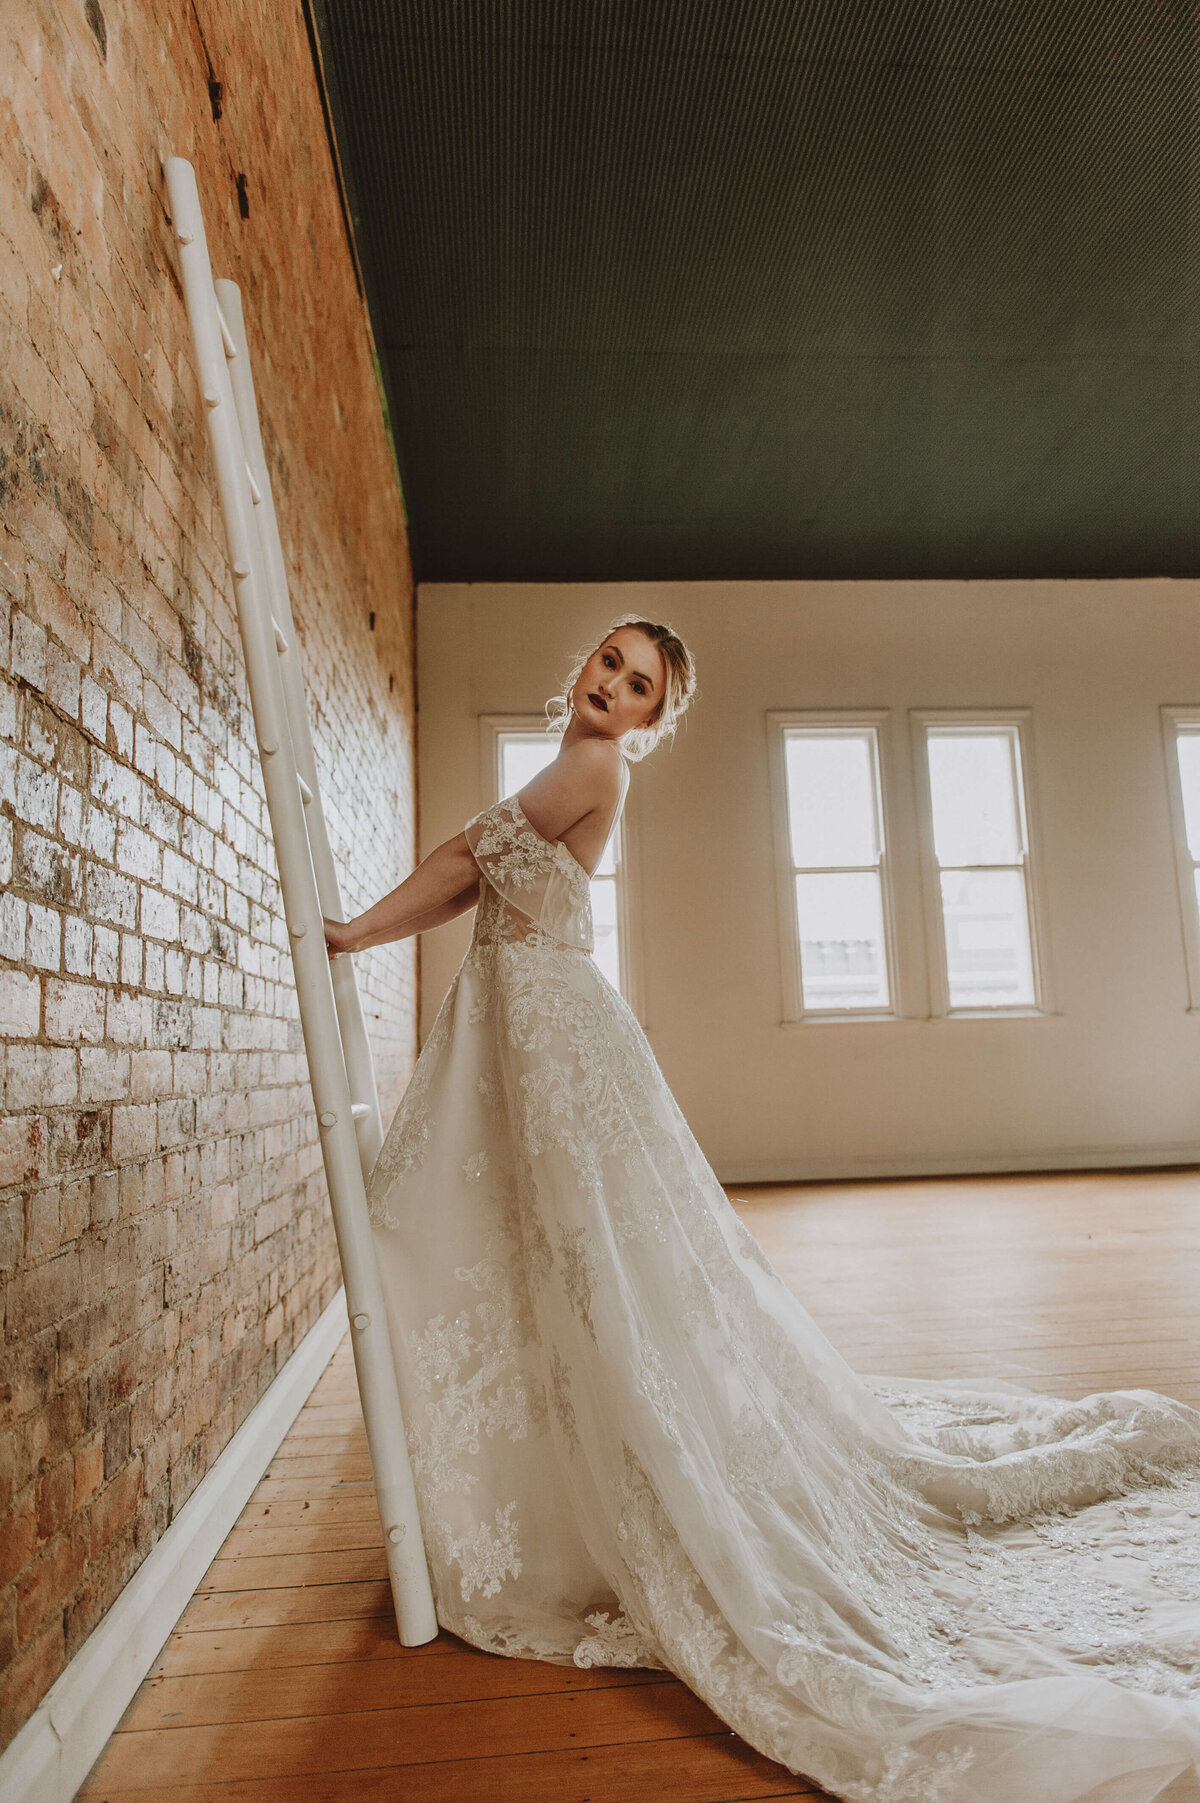 Gretta by Jacqueline May Bride_4